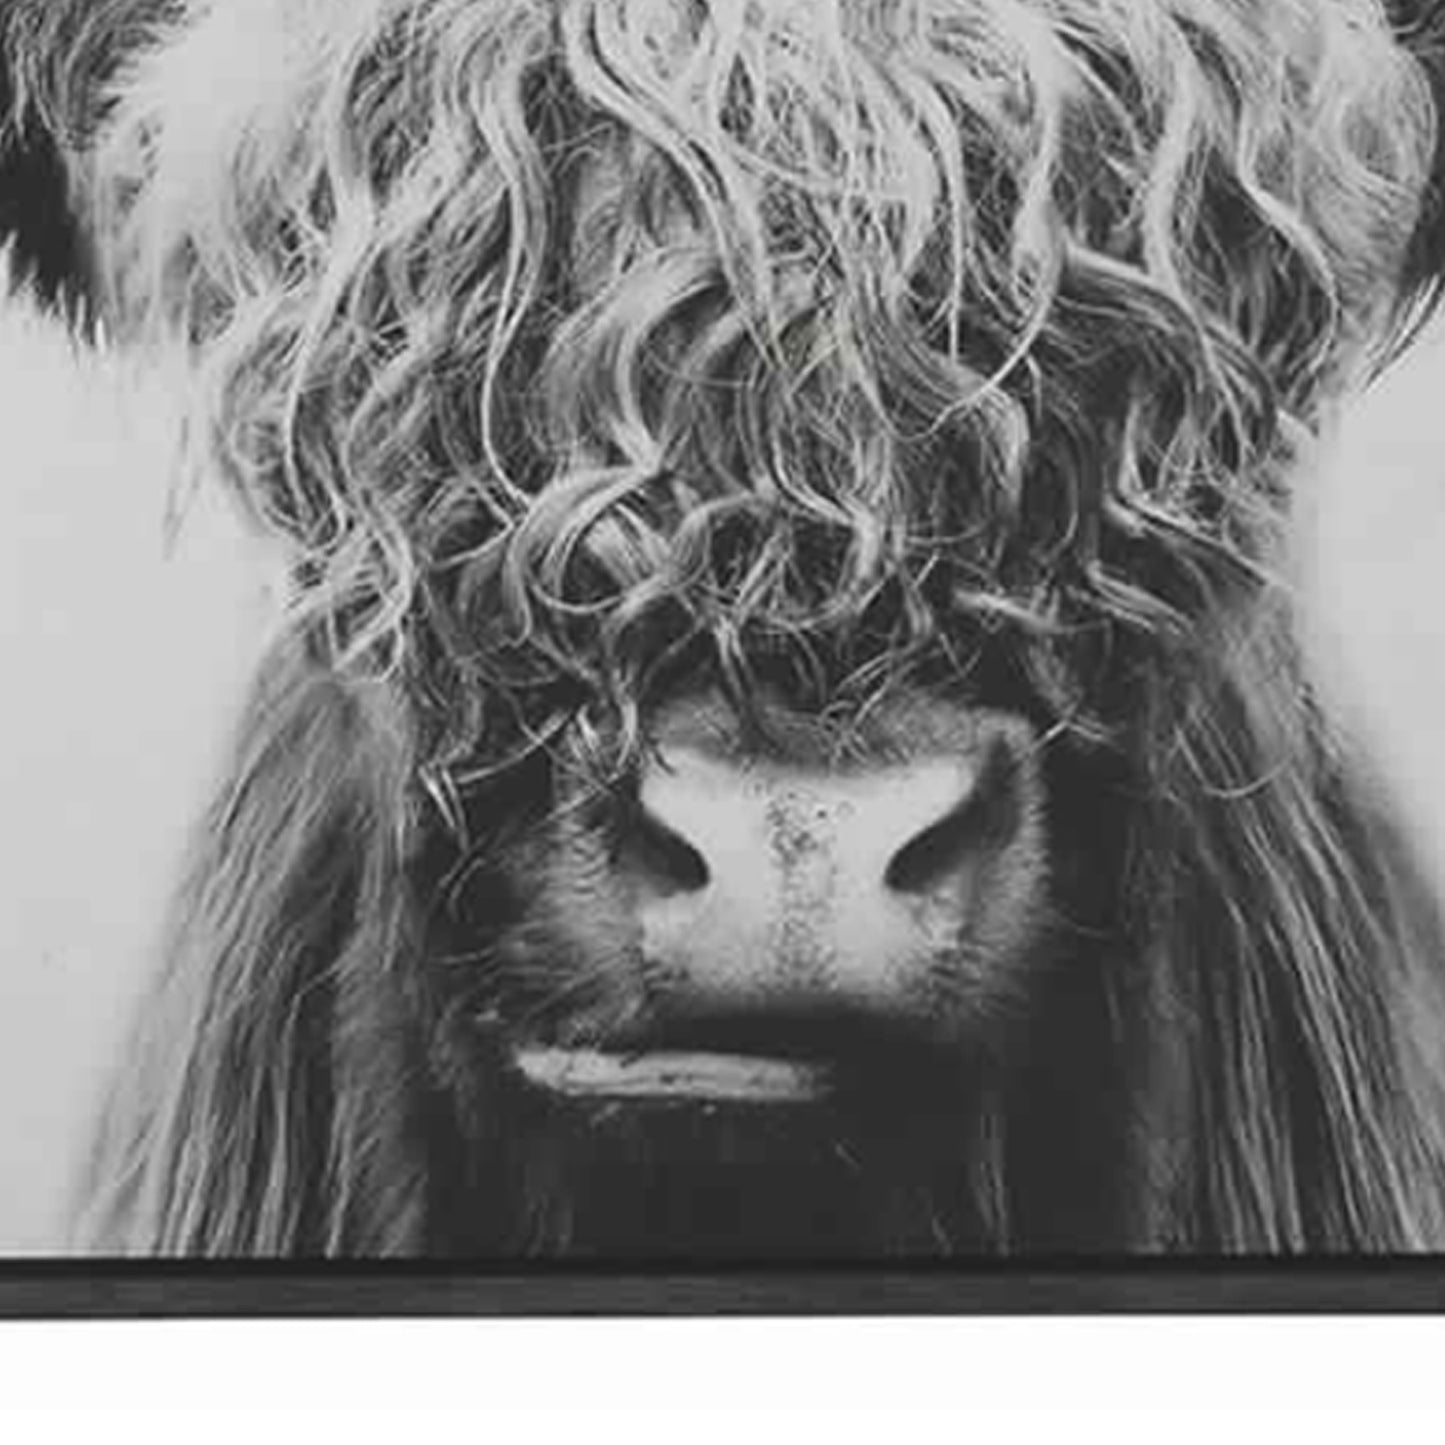 48" X 36" Wood Frame Highland Cow Wall Art, Black and White By Casagear Home